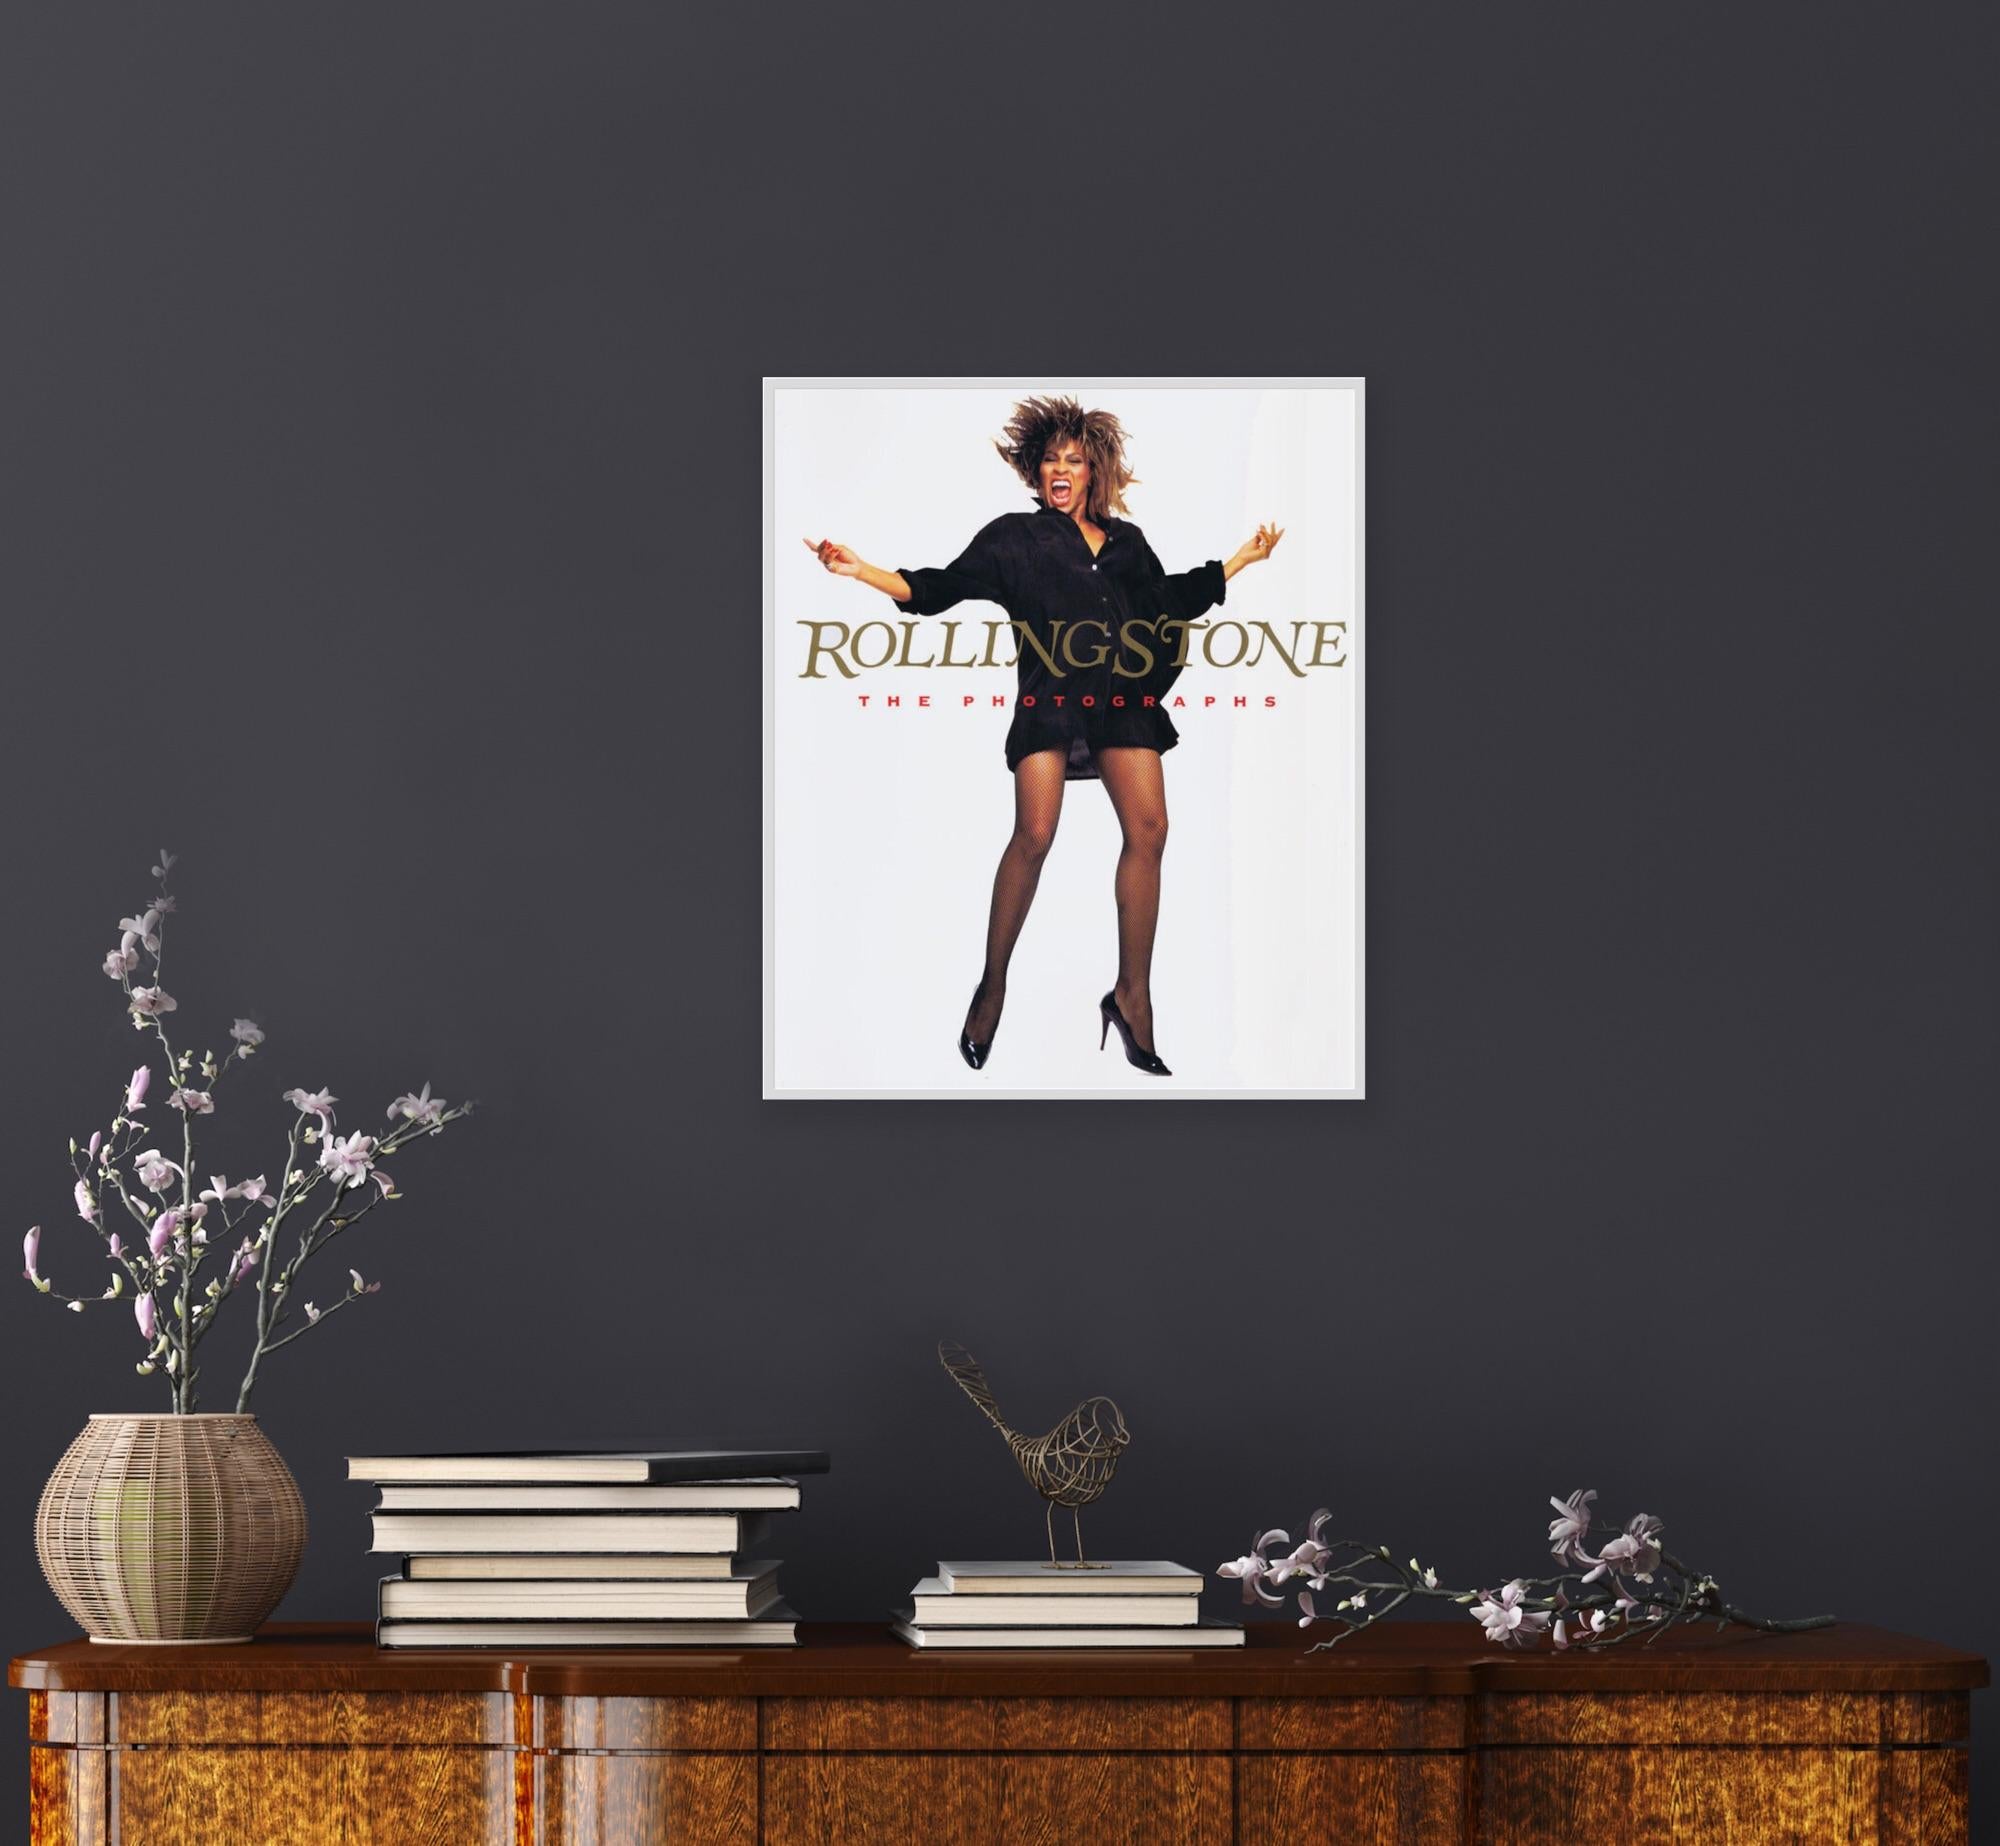 Tina Turner  Rolling Stone: The Photographs - Art Poster In Excellent Condition For Sale In East Quogue, NY